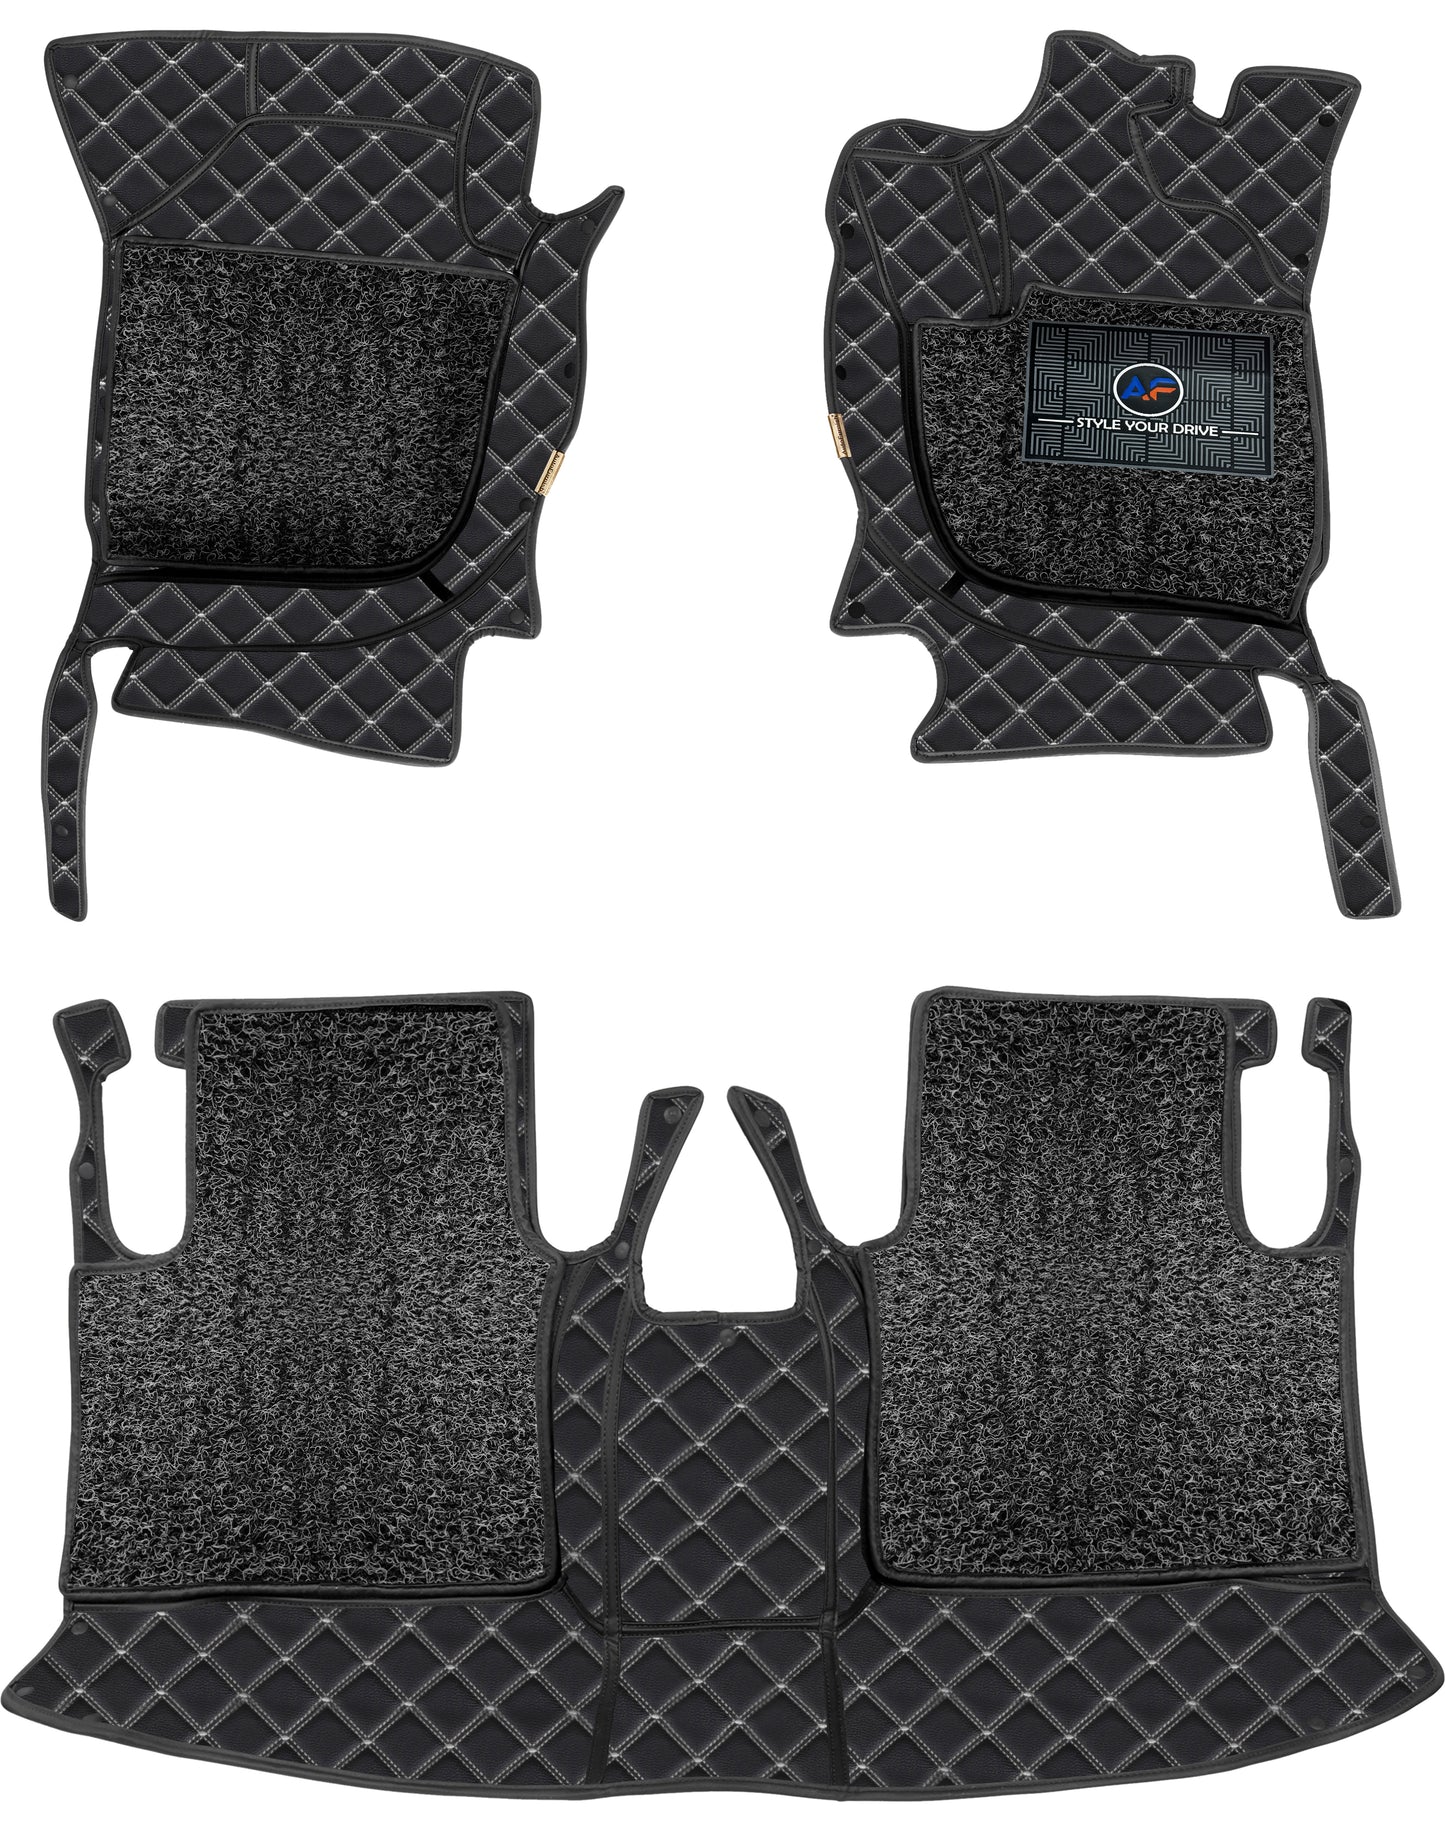 Renault Duster 2016-18-7D Luxury Car Mat, All Weather Proof, Anti-Skid, 100% Waterproof & Odorless with Unique Diamond Fish Design (24mm Luxury PU Leather, 2 Rows)